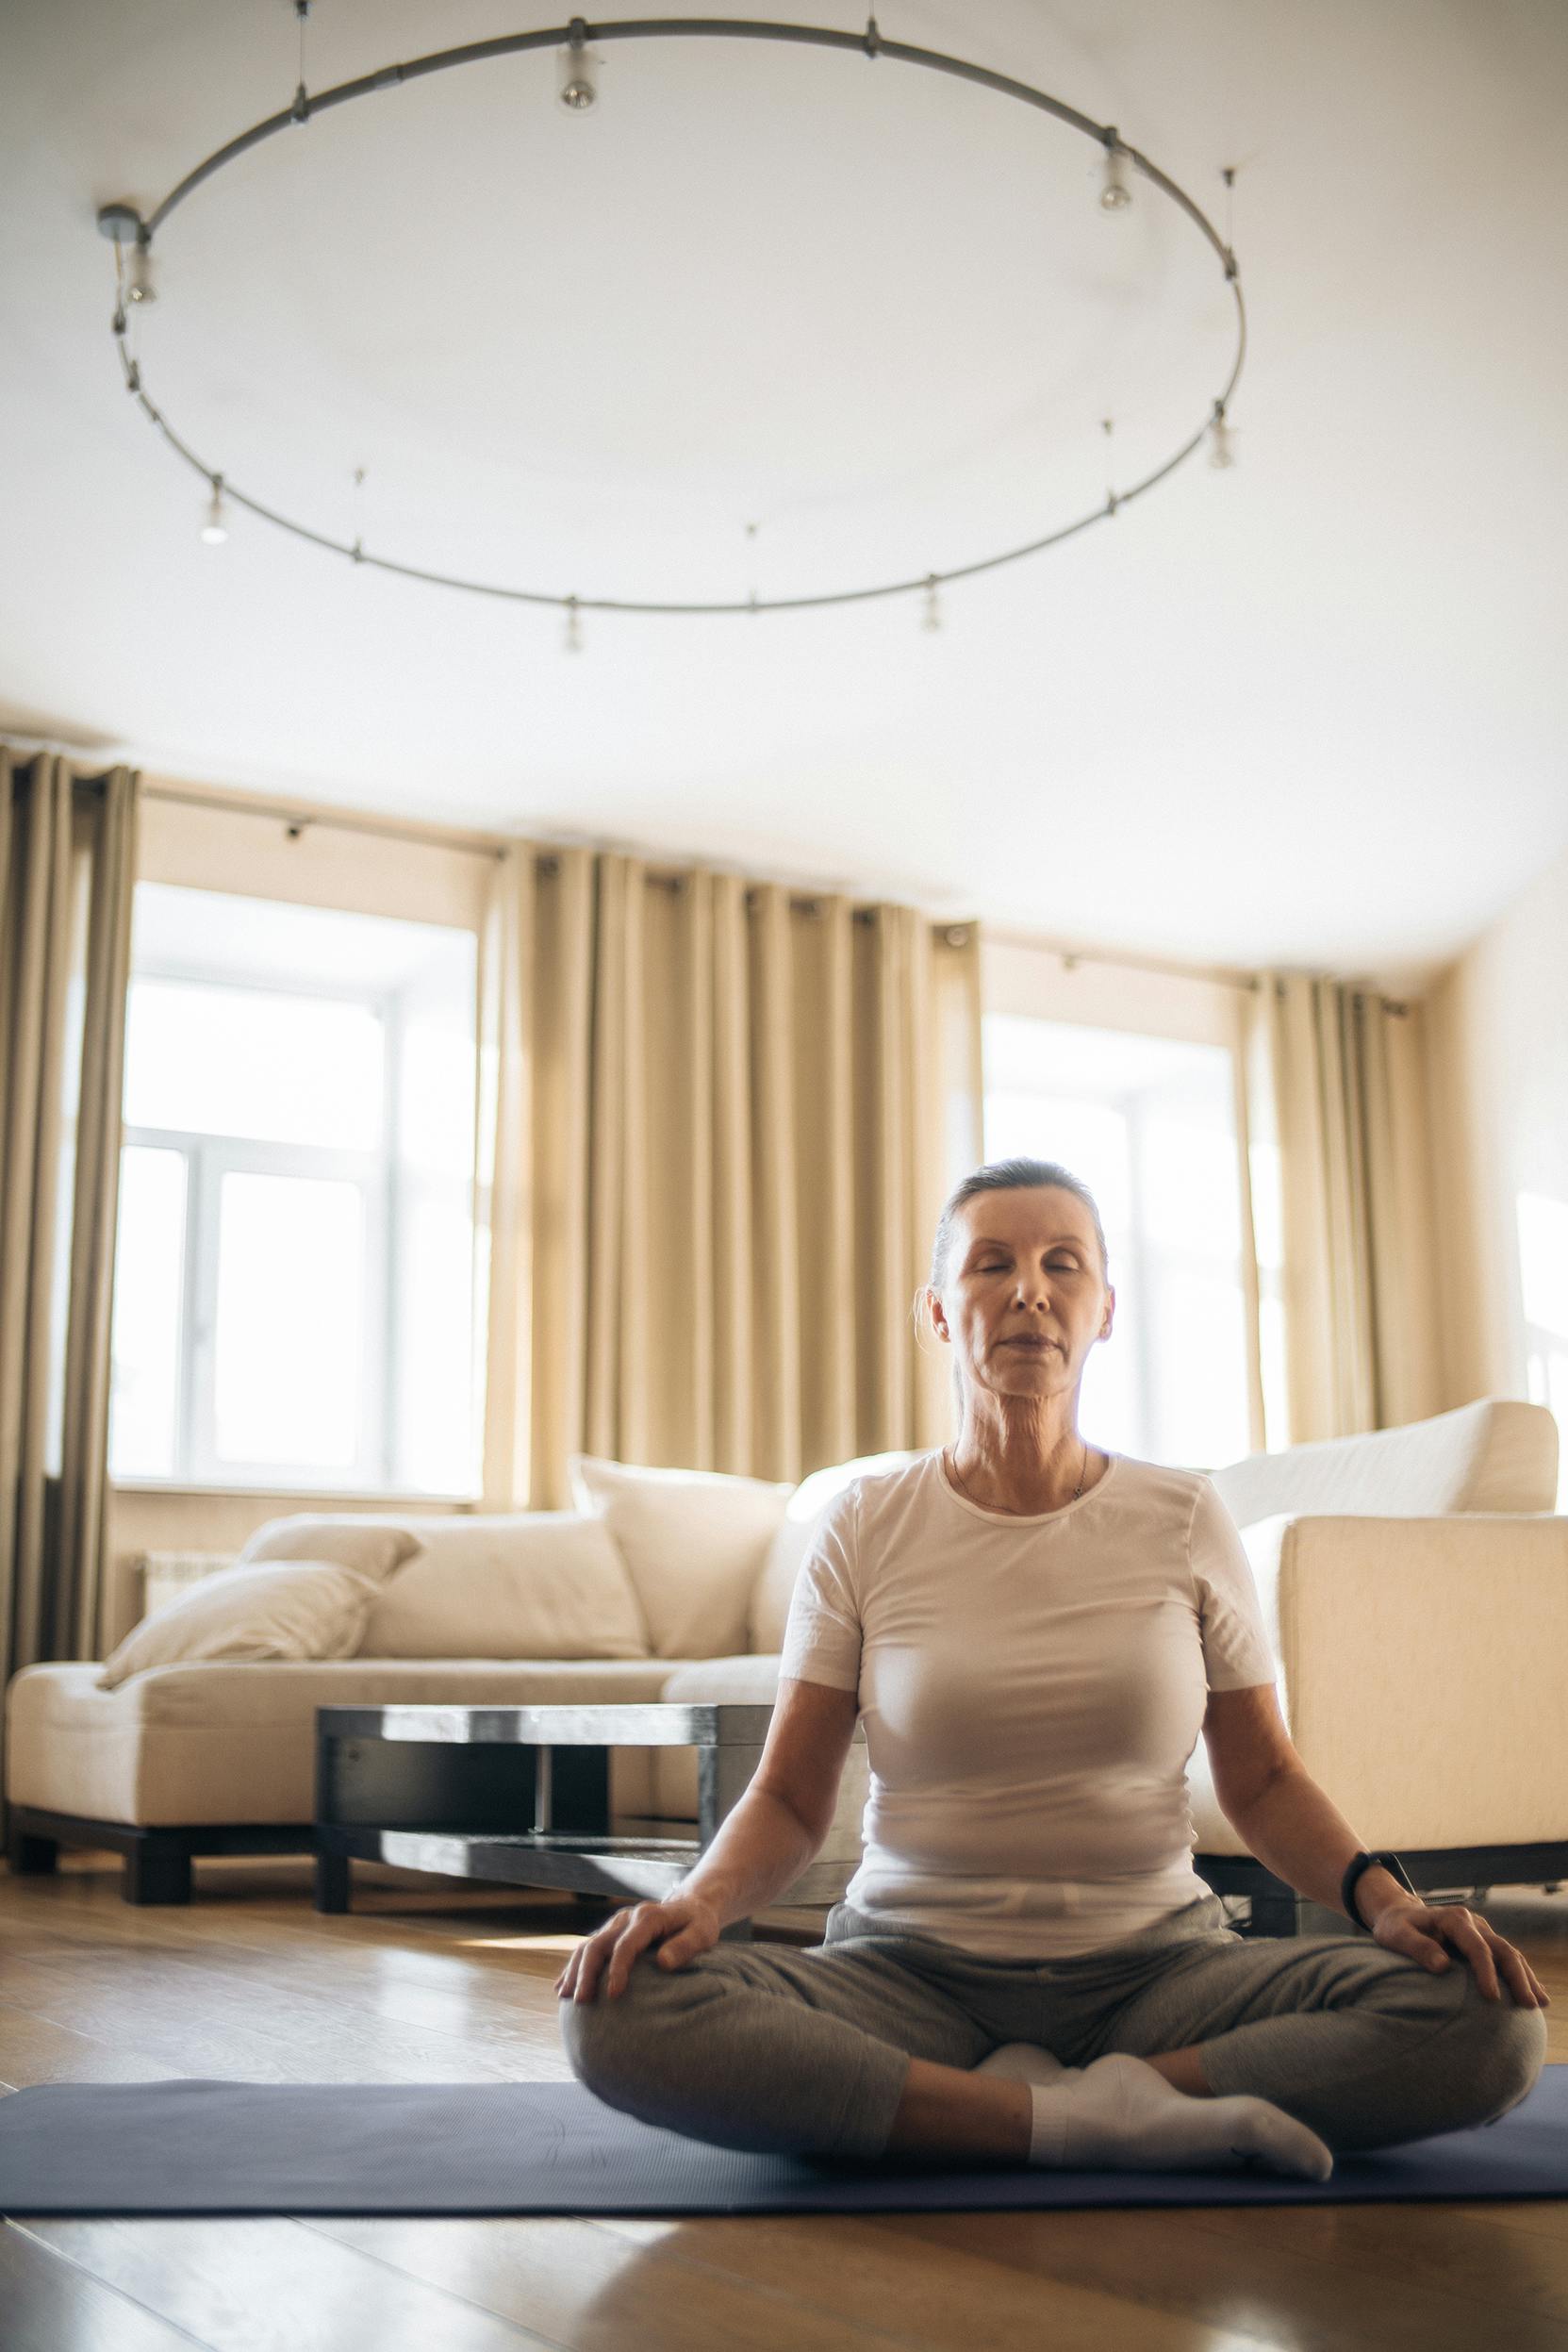 middle-aged woman doing yoga - Stock Image - F003/8652 - Science Photo  Library